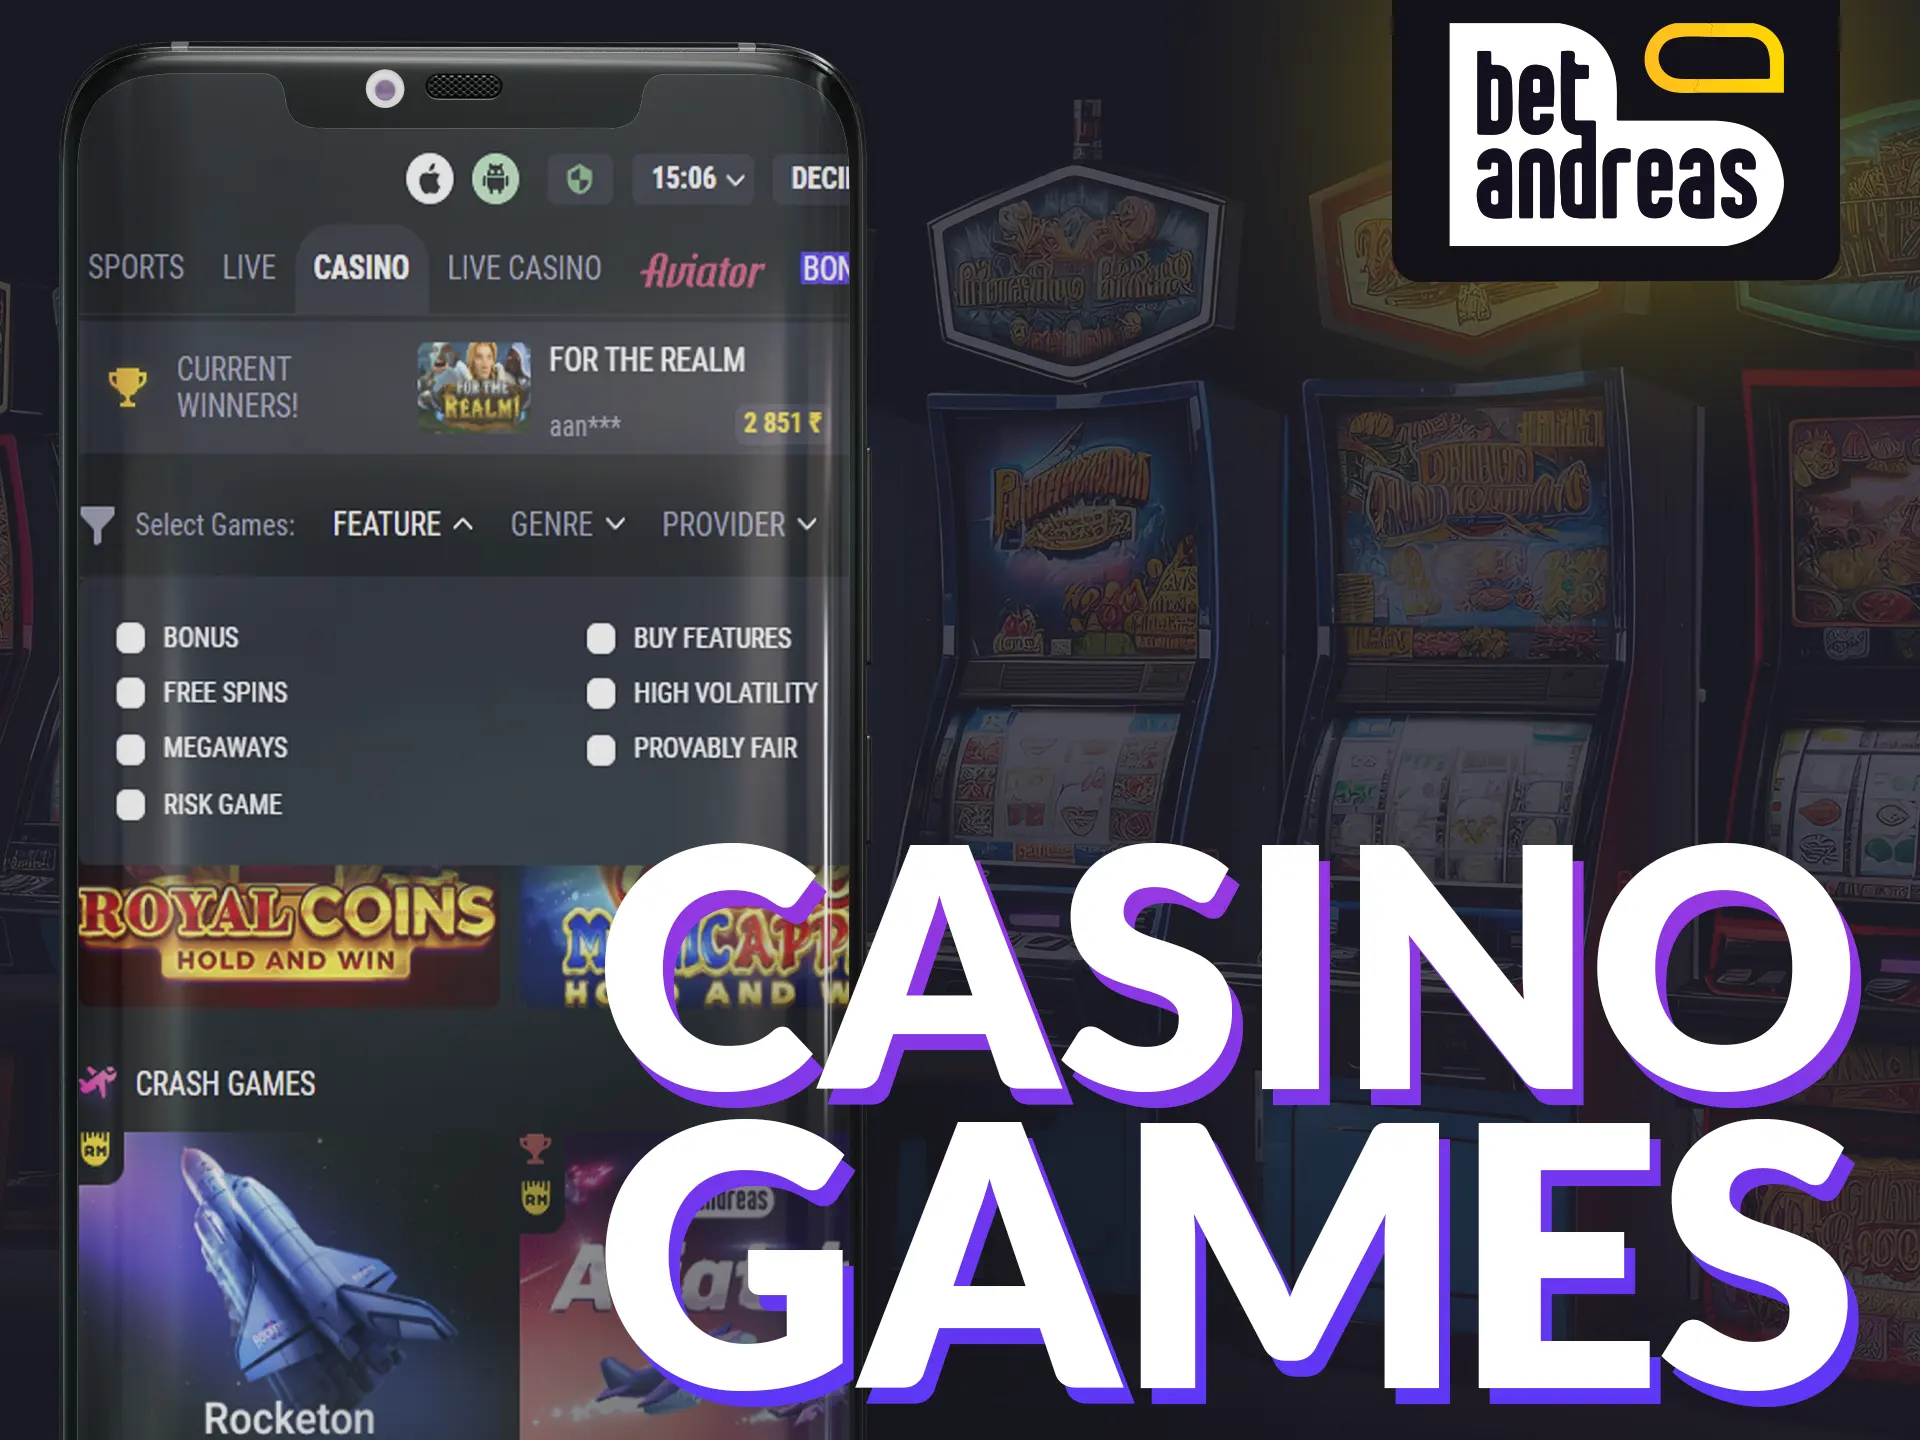 Check out the most popular BetAndreas casino games.